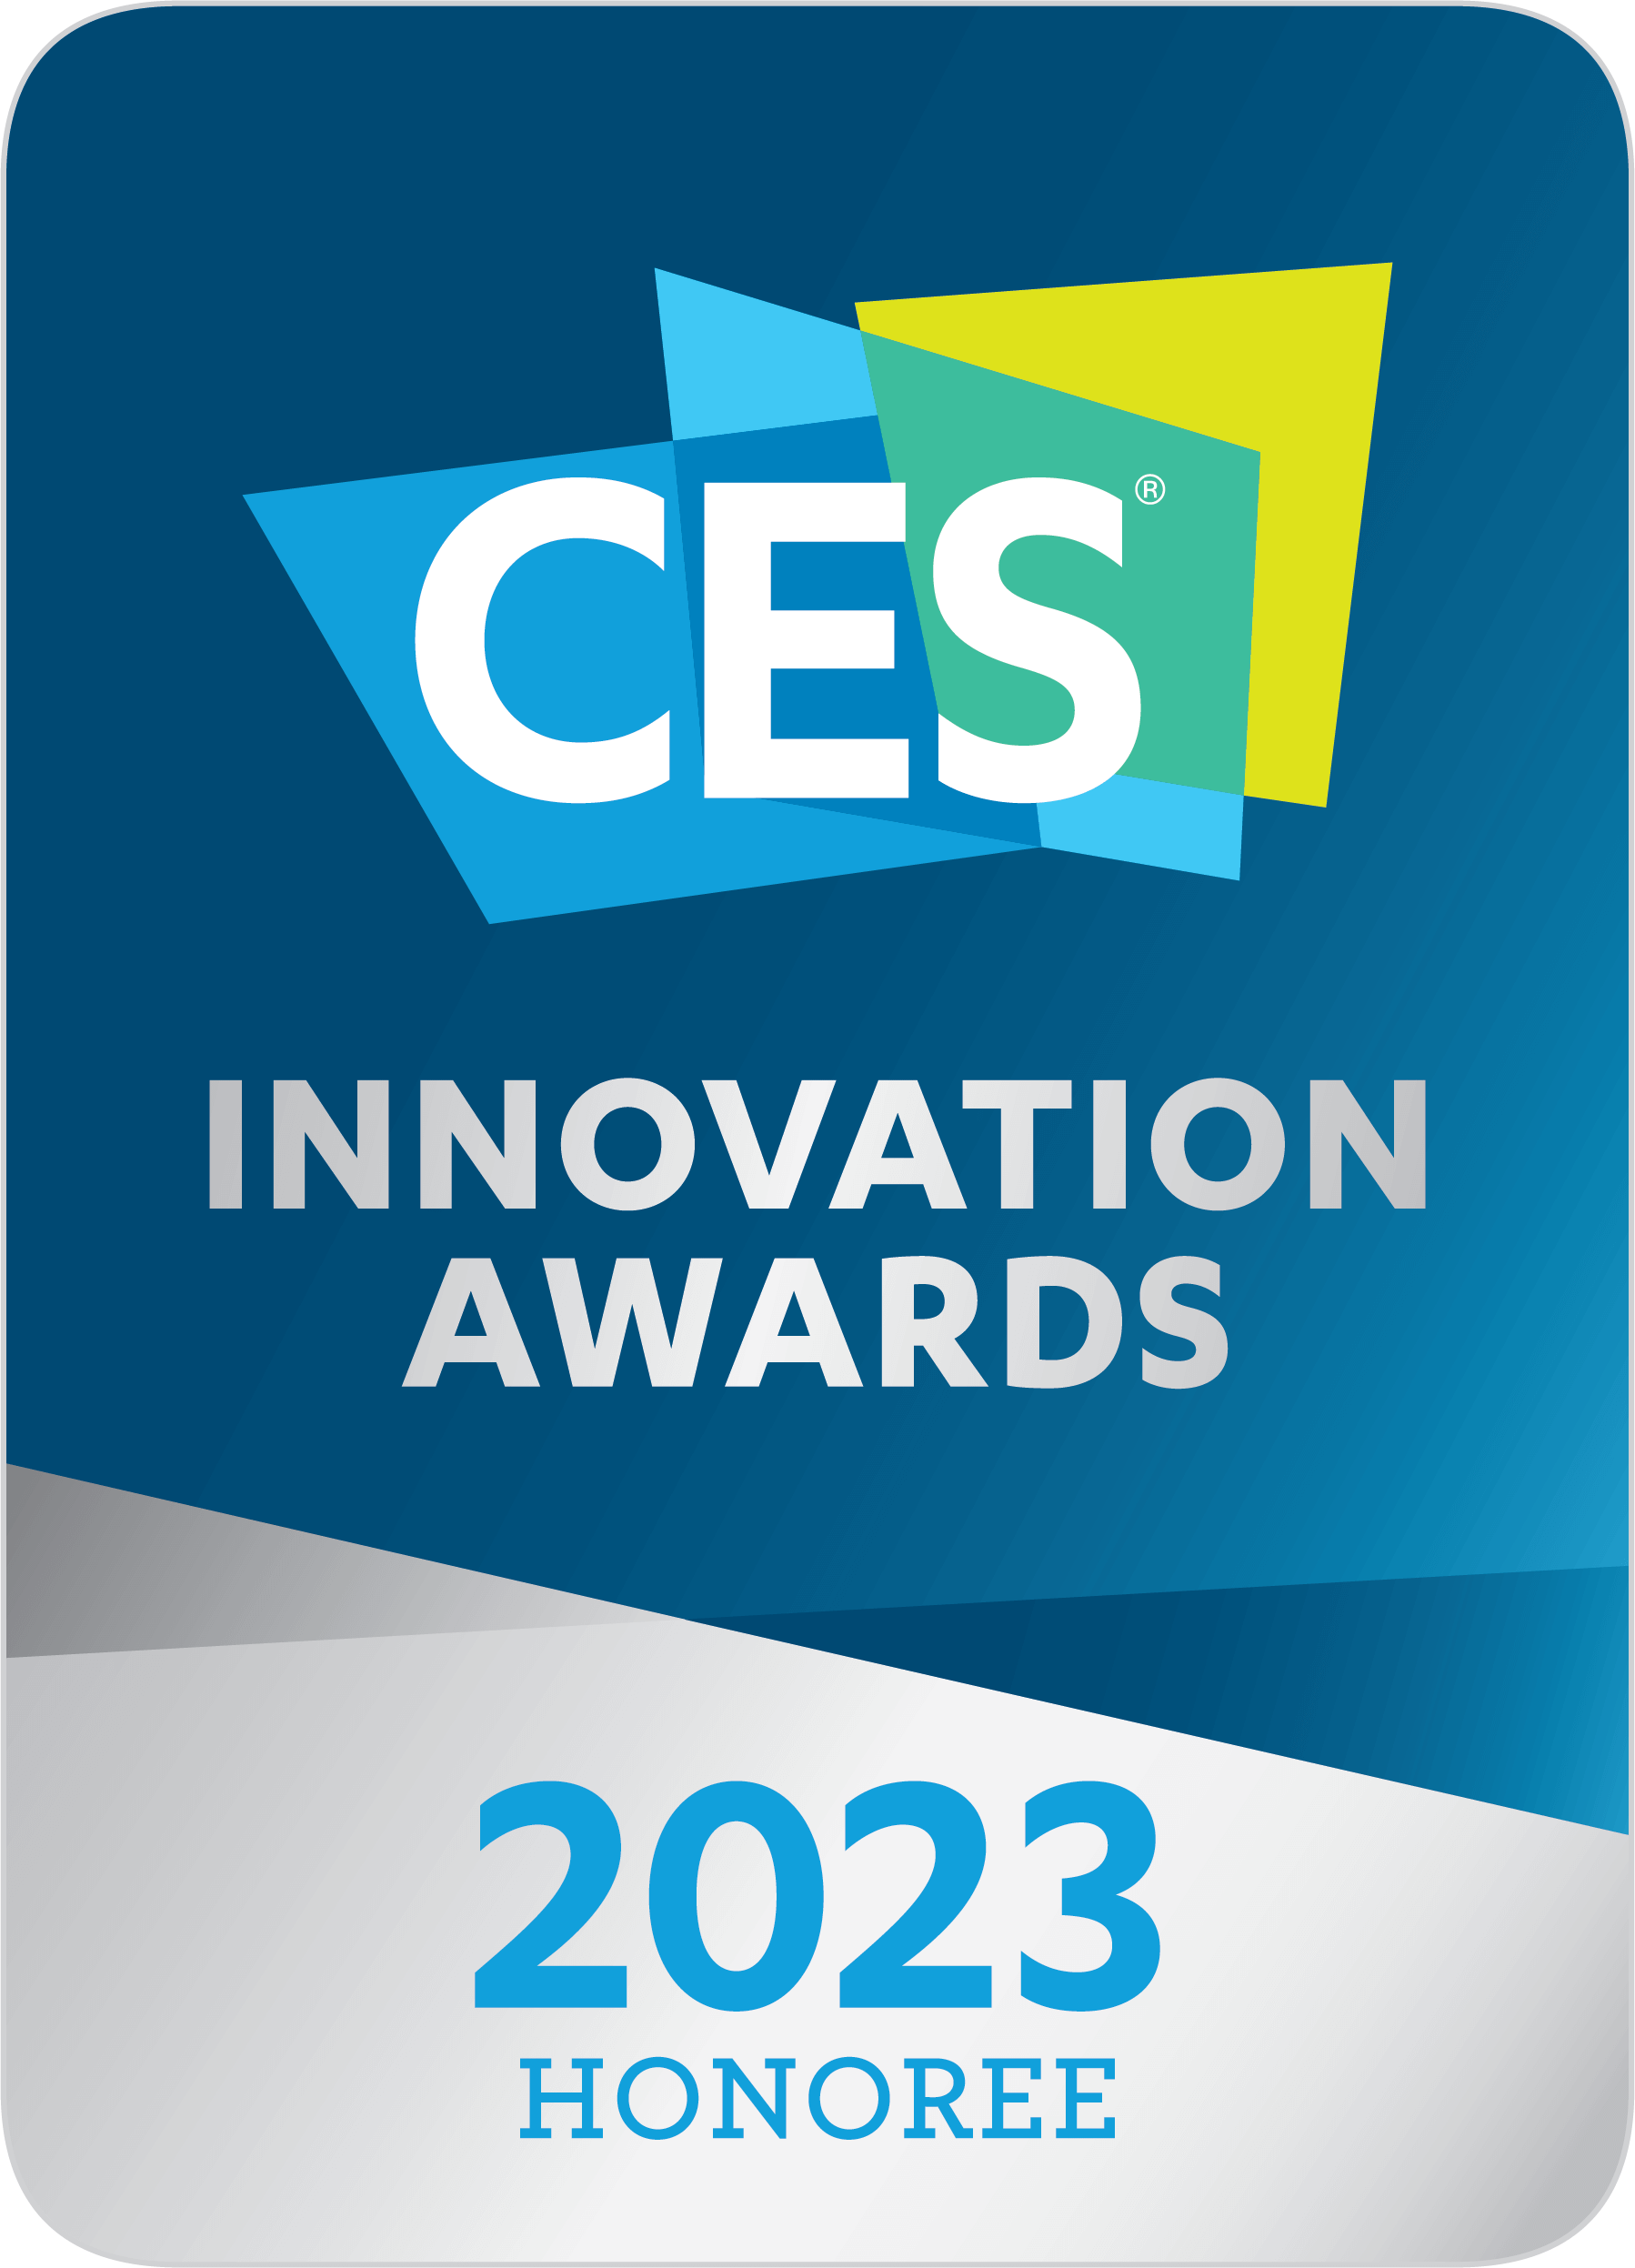 CES 2023 Innovation Awards Honoree